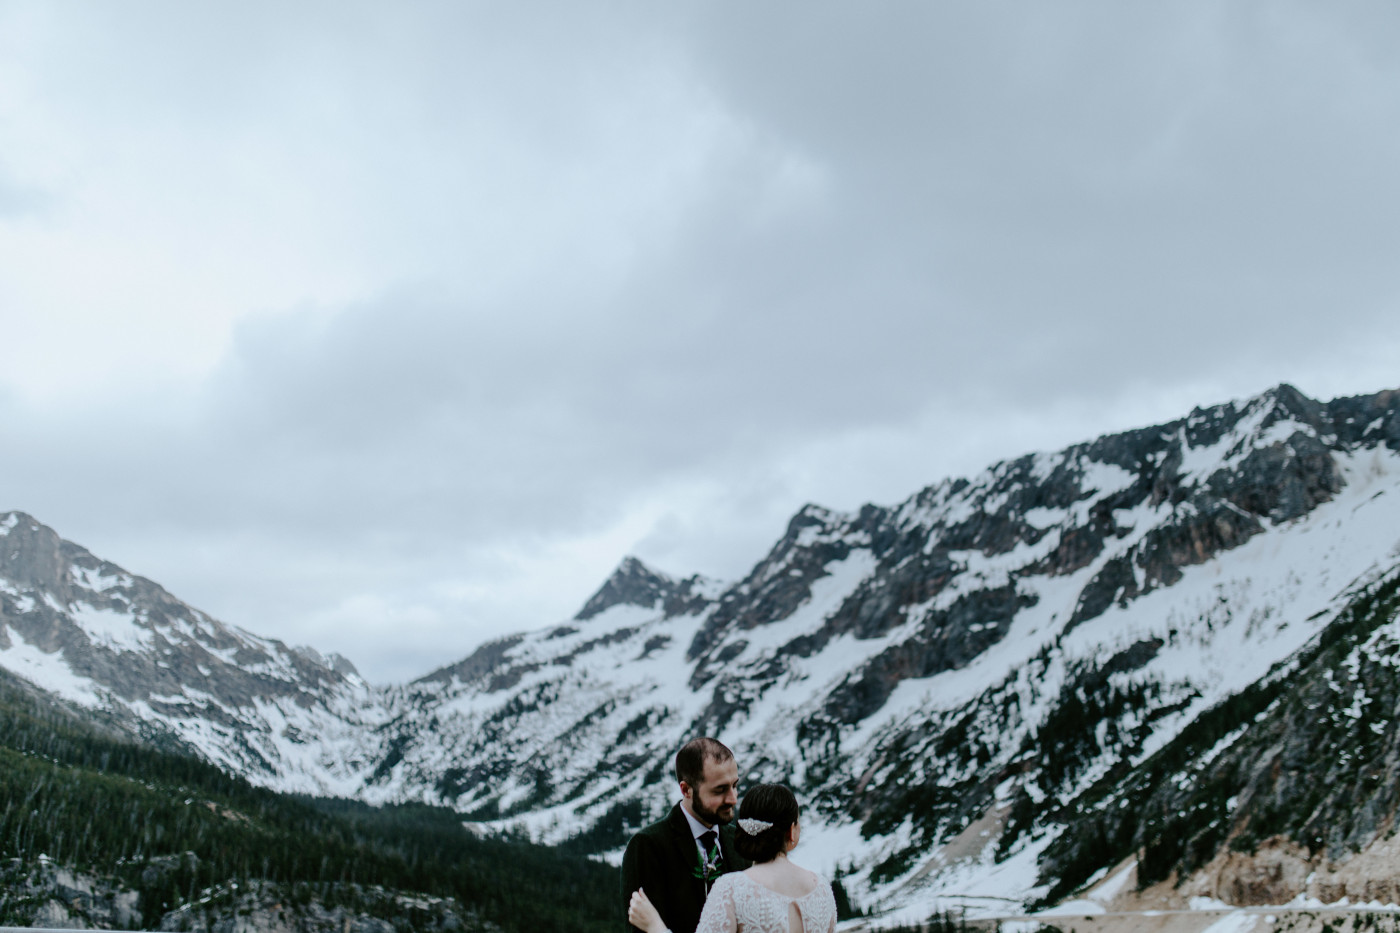 Elizabeth and Alex kiss while dancing. Elopement photography at North Cascades National Park by Sienna Plus Josh.